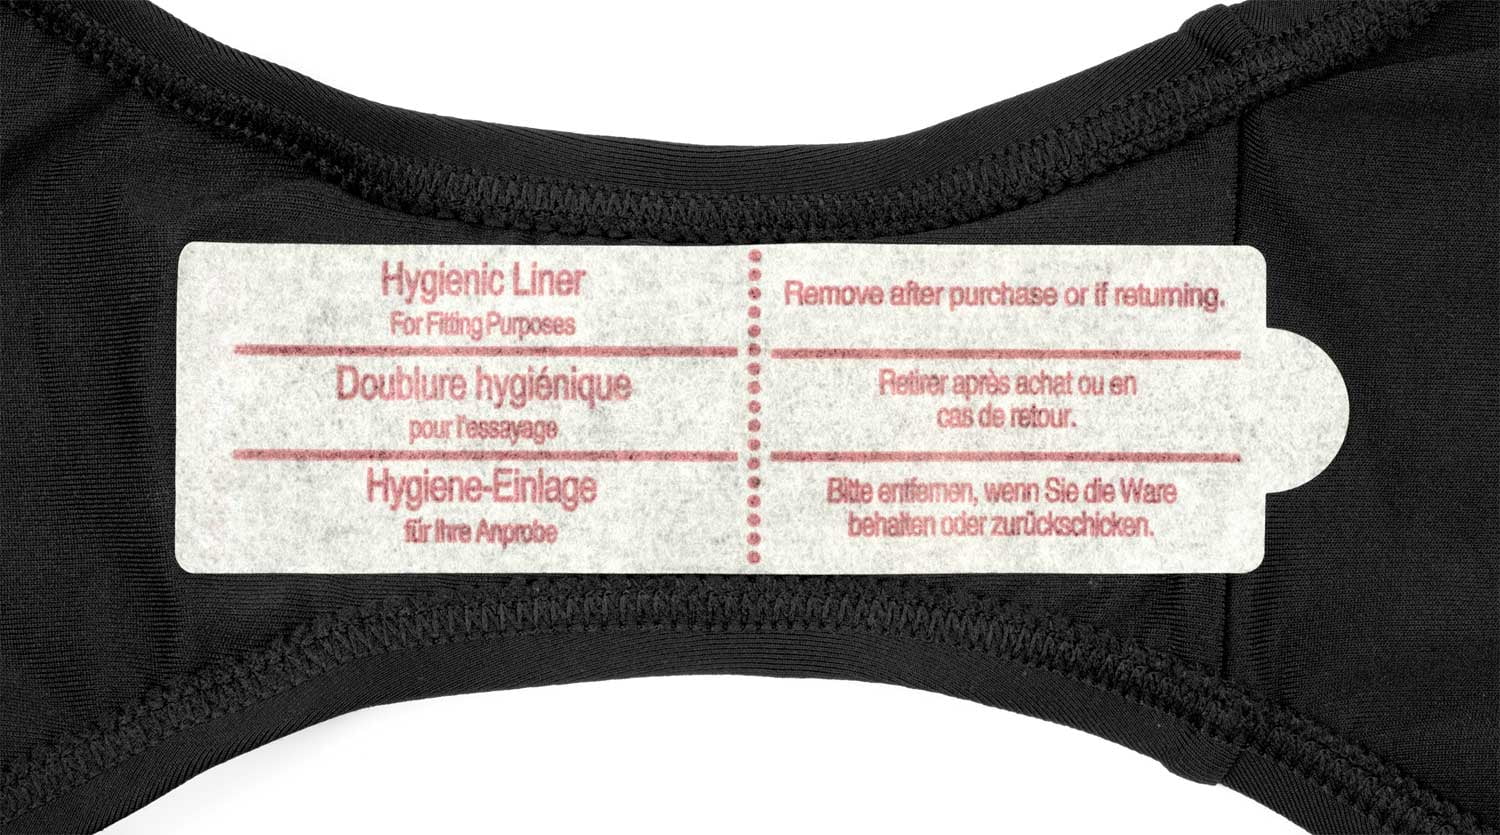 Liners Hygienic Protective for Swimwear Lingerie Adhesive Strip Lot of 100 NEW 